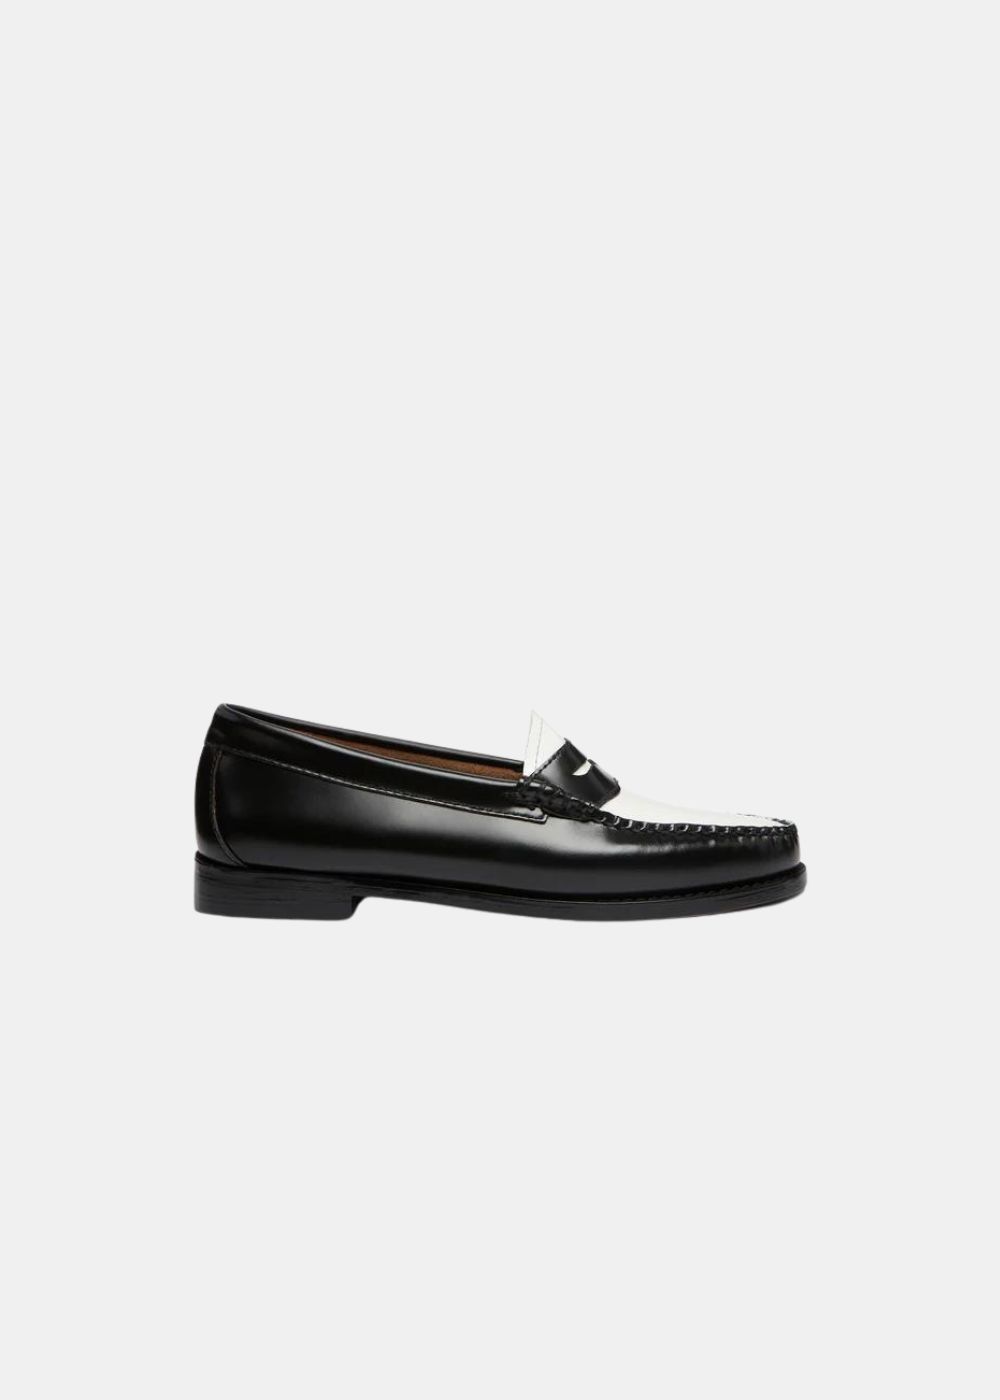 Featured image for “Mocassini donna Weejuns Penny Loafers - G.H. Bass”